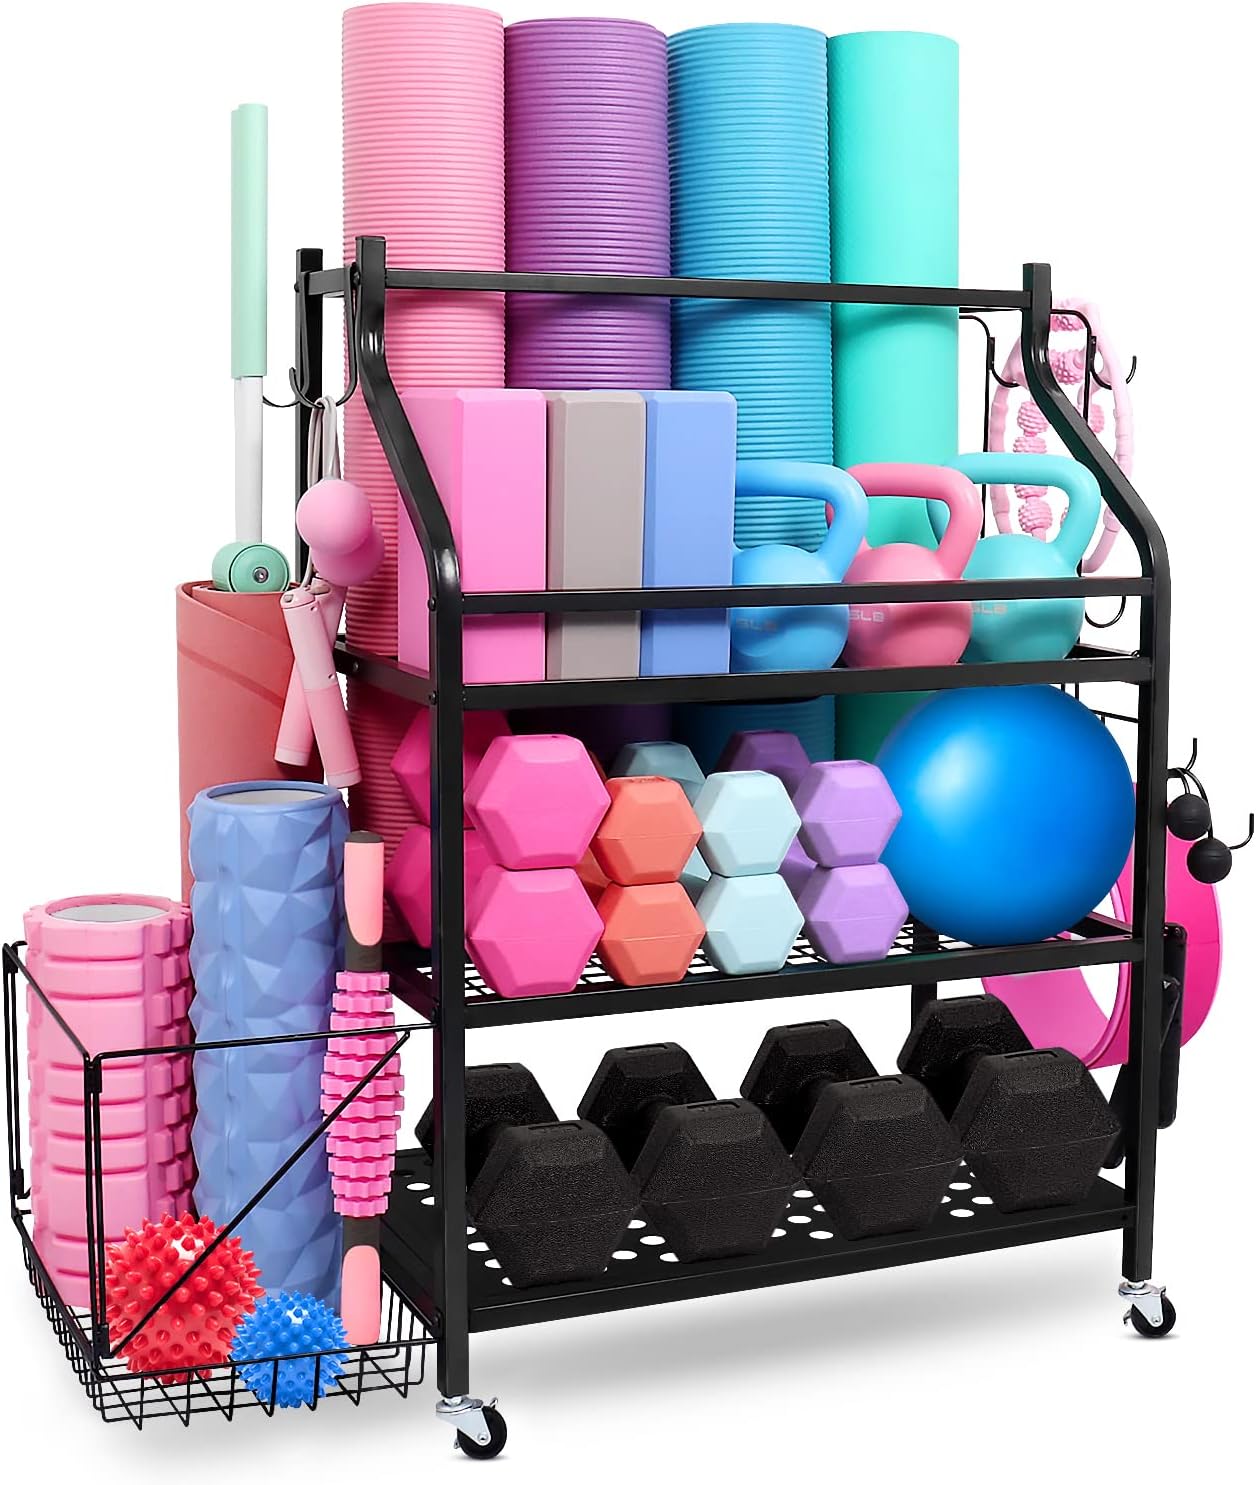 Yoga Mat Holder Storage Rack - Upgraded Weight Rack for Home Gym Storage , 4 Tier Strength Training Dumbbell Rack, Rolling Exercise Workout Equipment Organizer for Kettlebells, Yoga Balls Foam Rollers